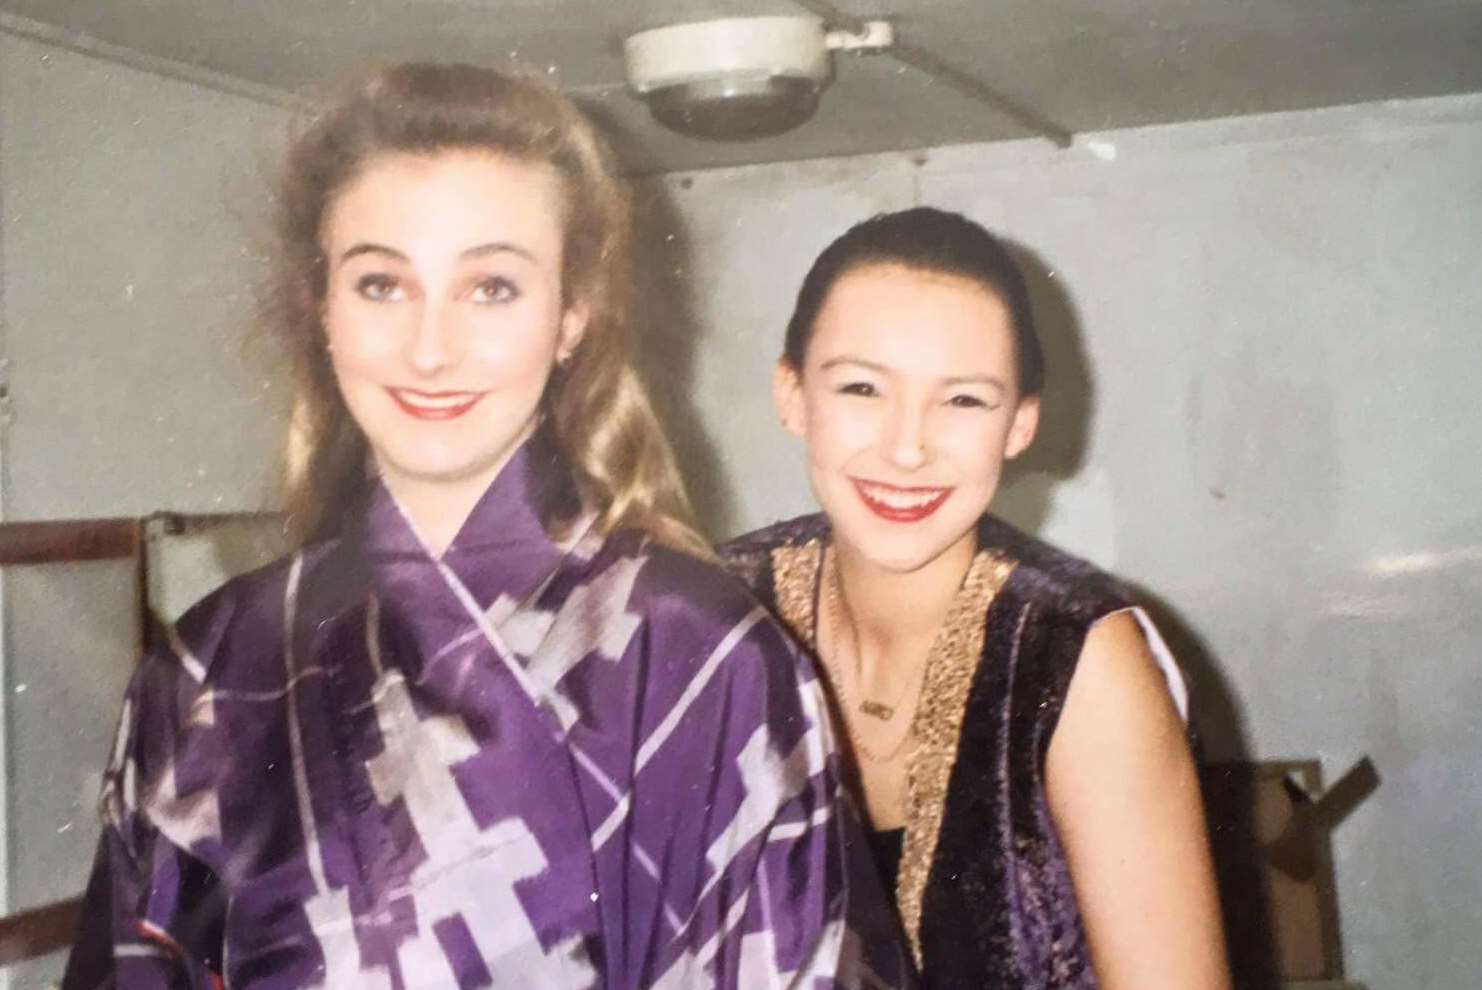 Nikki White (right) and her college friend prepare for their panto performance, circa 1992